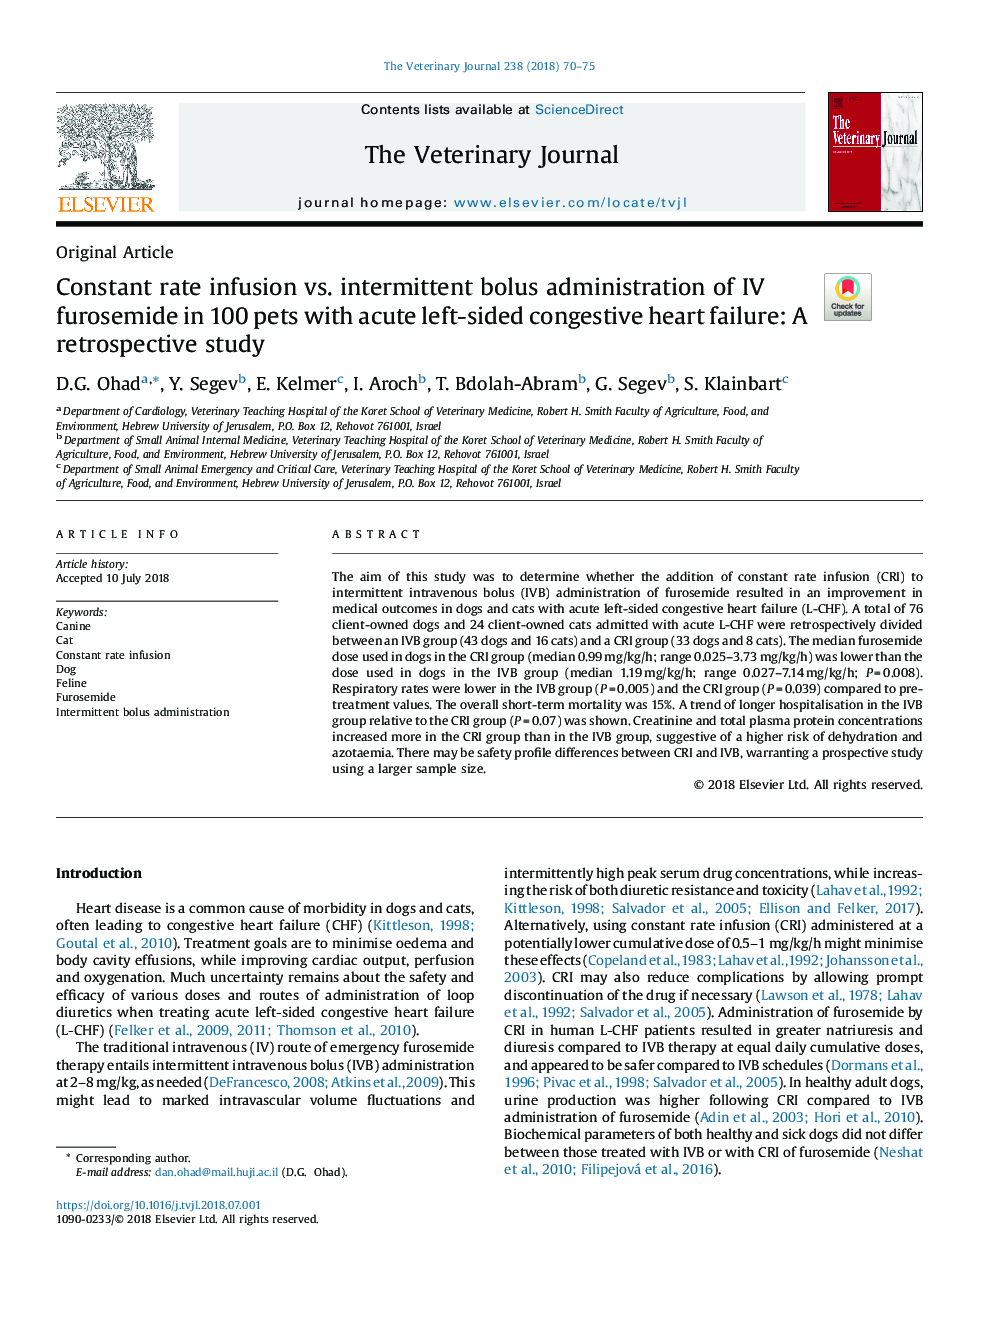 Constant rate infusion vs. intermittent bolus administration of IV furosemide in 100 pets with acute left-sided congestive heart failure: A retrospective study